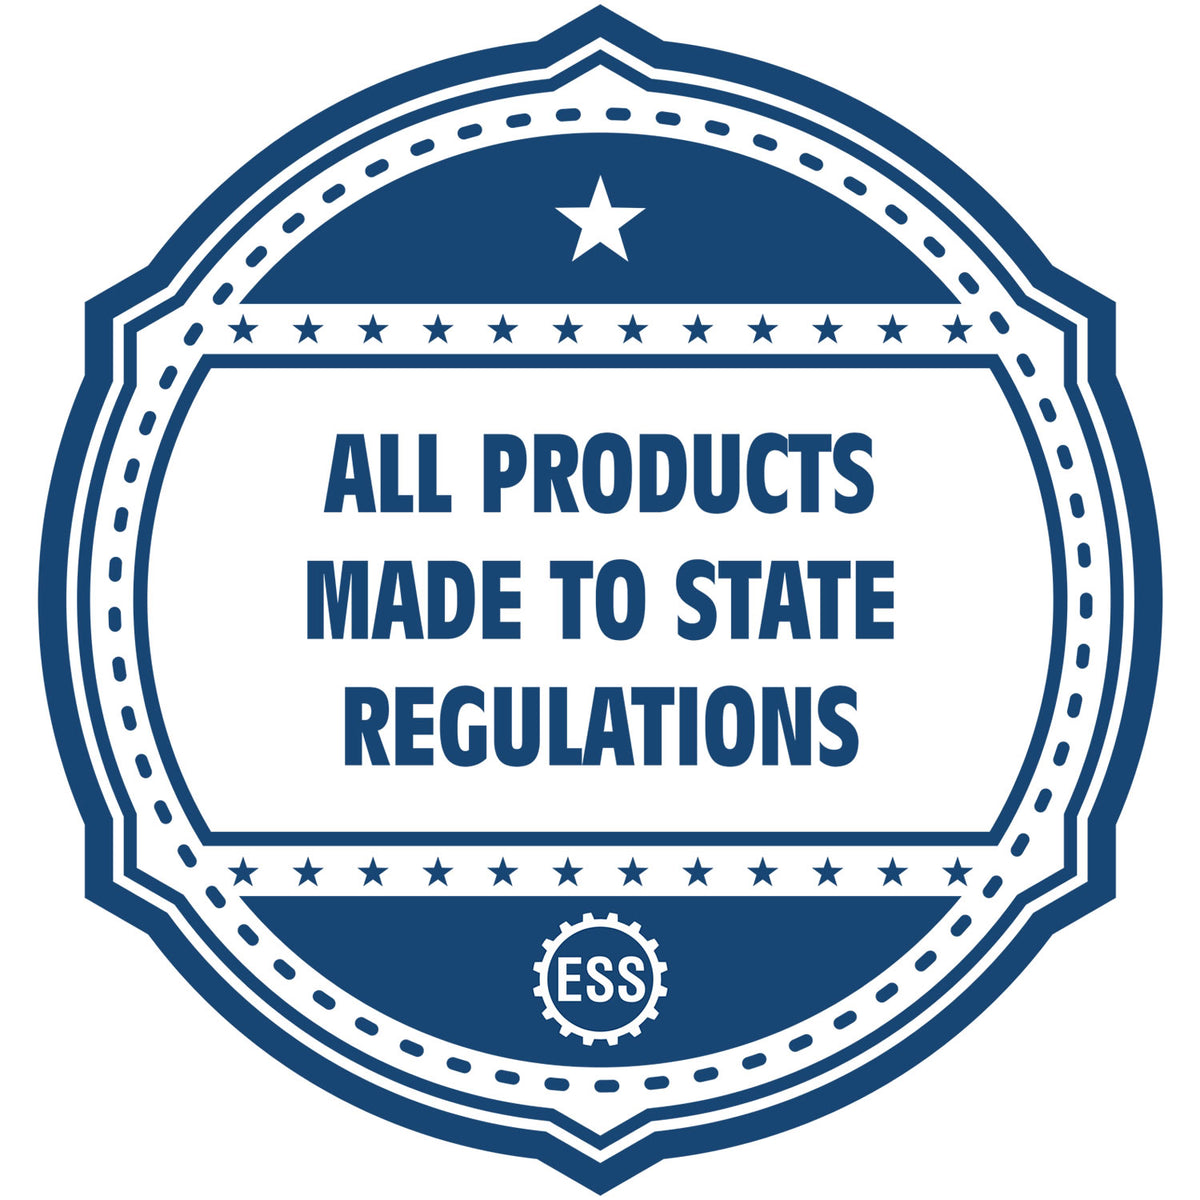 An icon or badge element for the Long Reach Louisiana PE Seal showing that this product is made in compliance with state regulations.